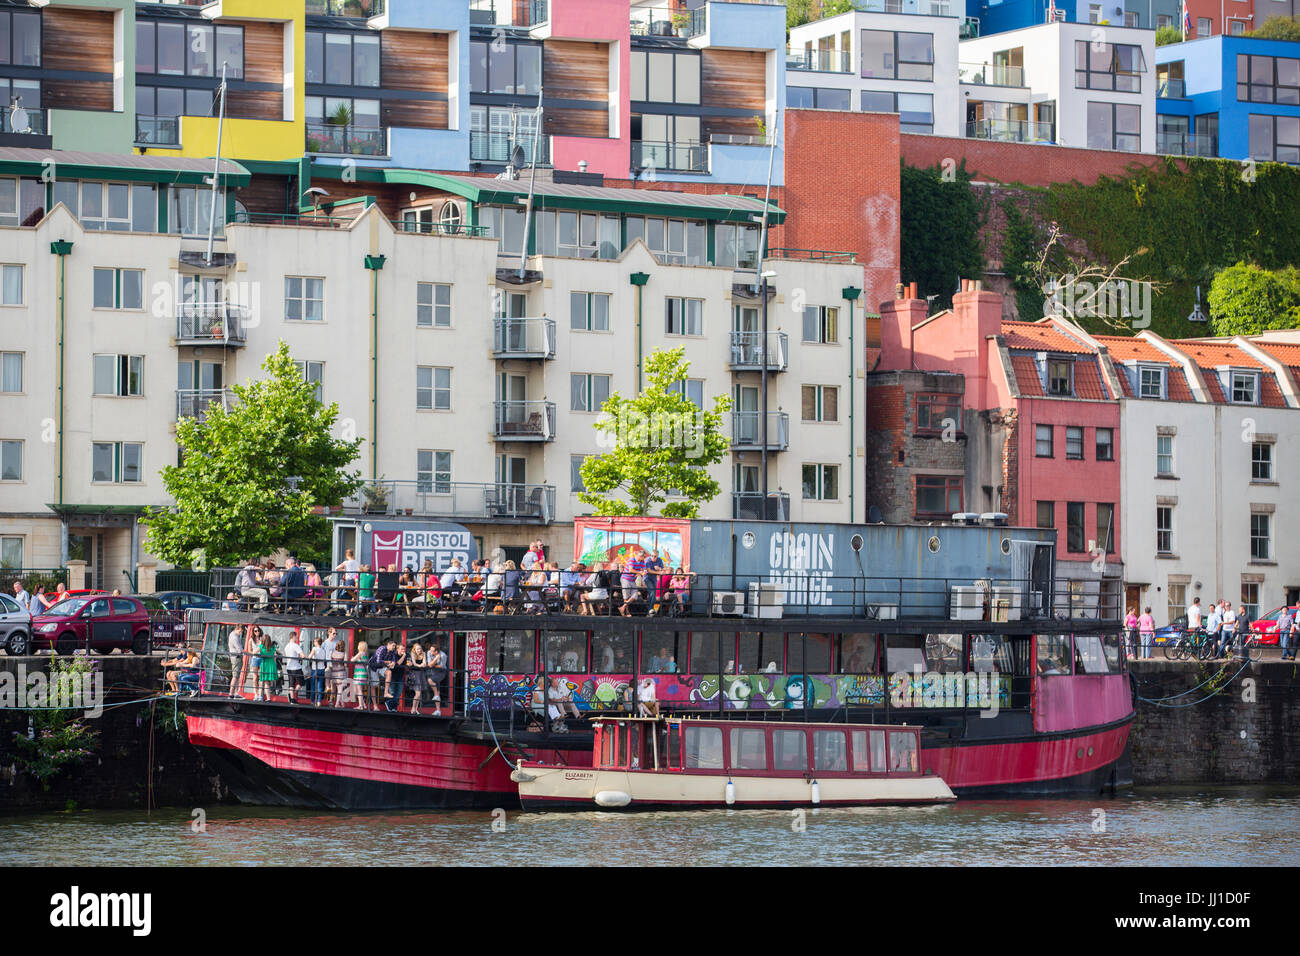 People drink on The Grain Barge - a pub and bar on a boat owned by Bristol Beer Factory - during Harbour Festival. Stock Photo